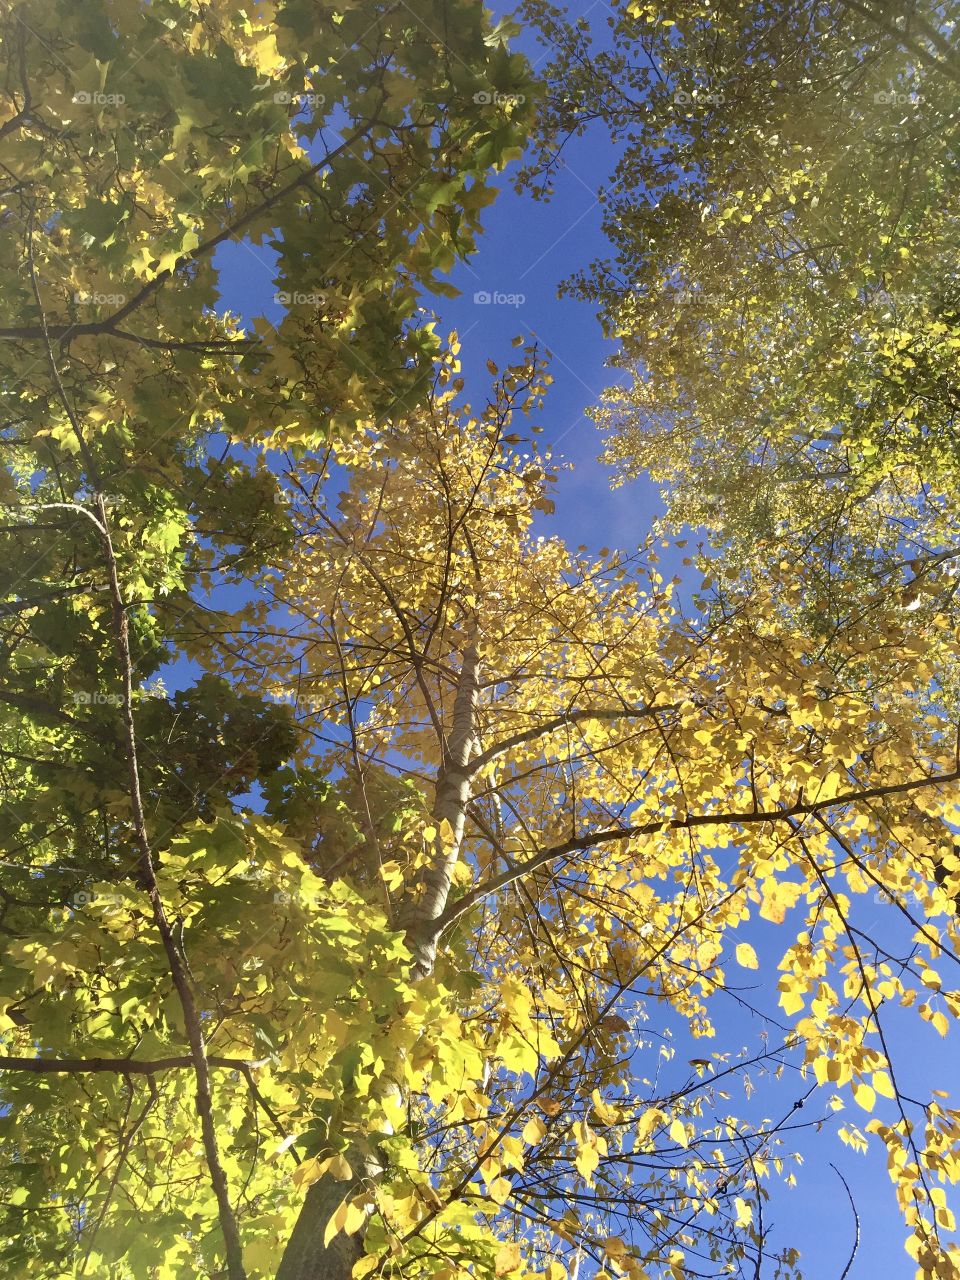 look from the bottom up. Yellow autumn foliage against a blue sky. Golden autumn.